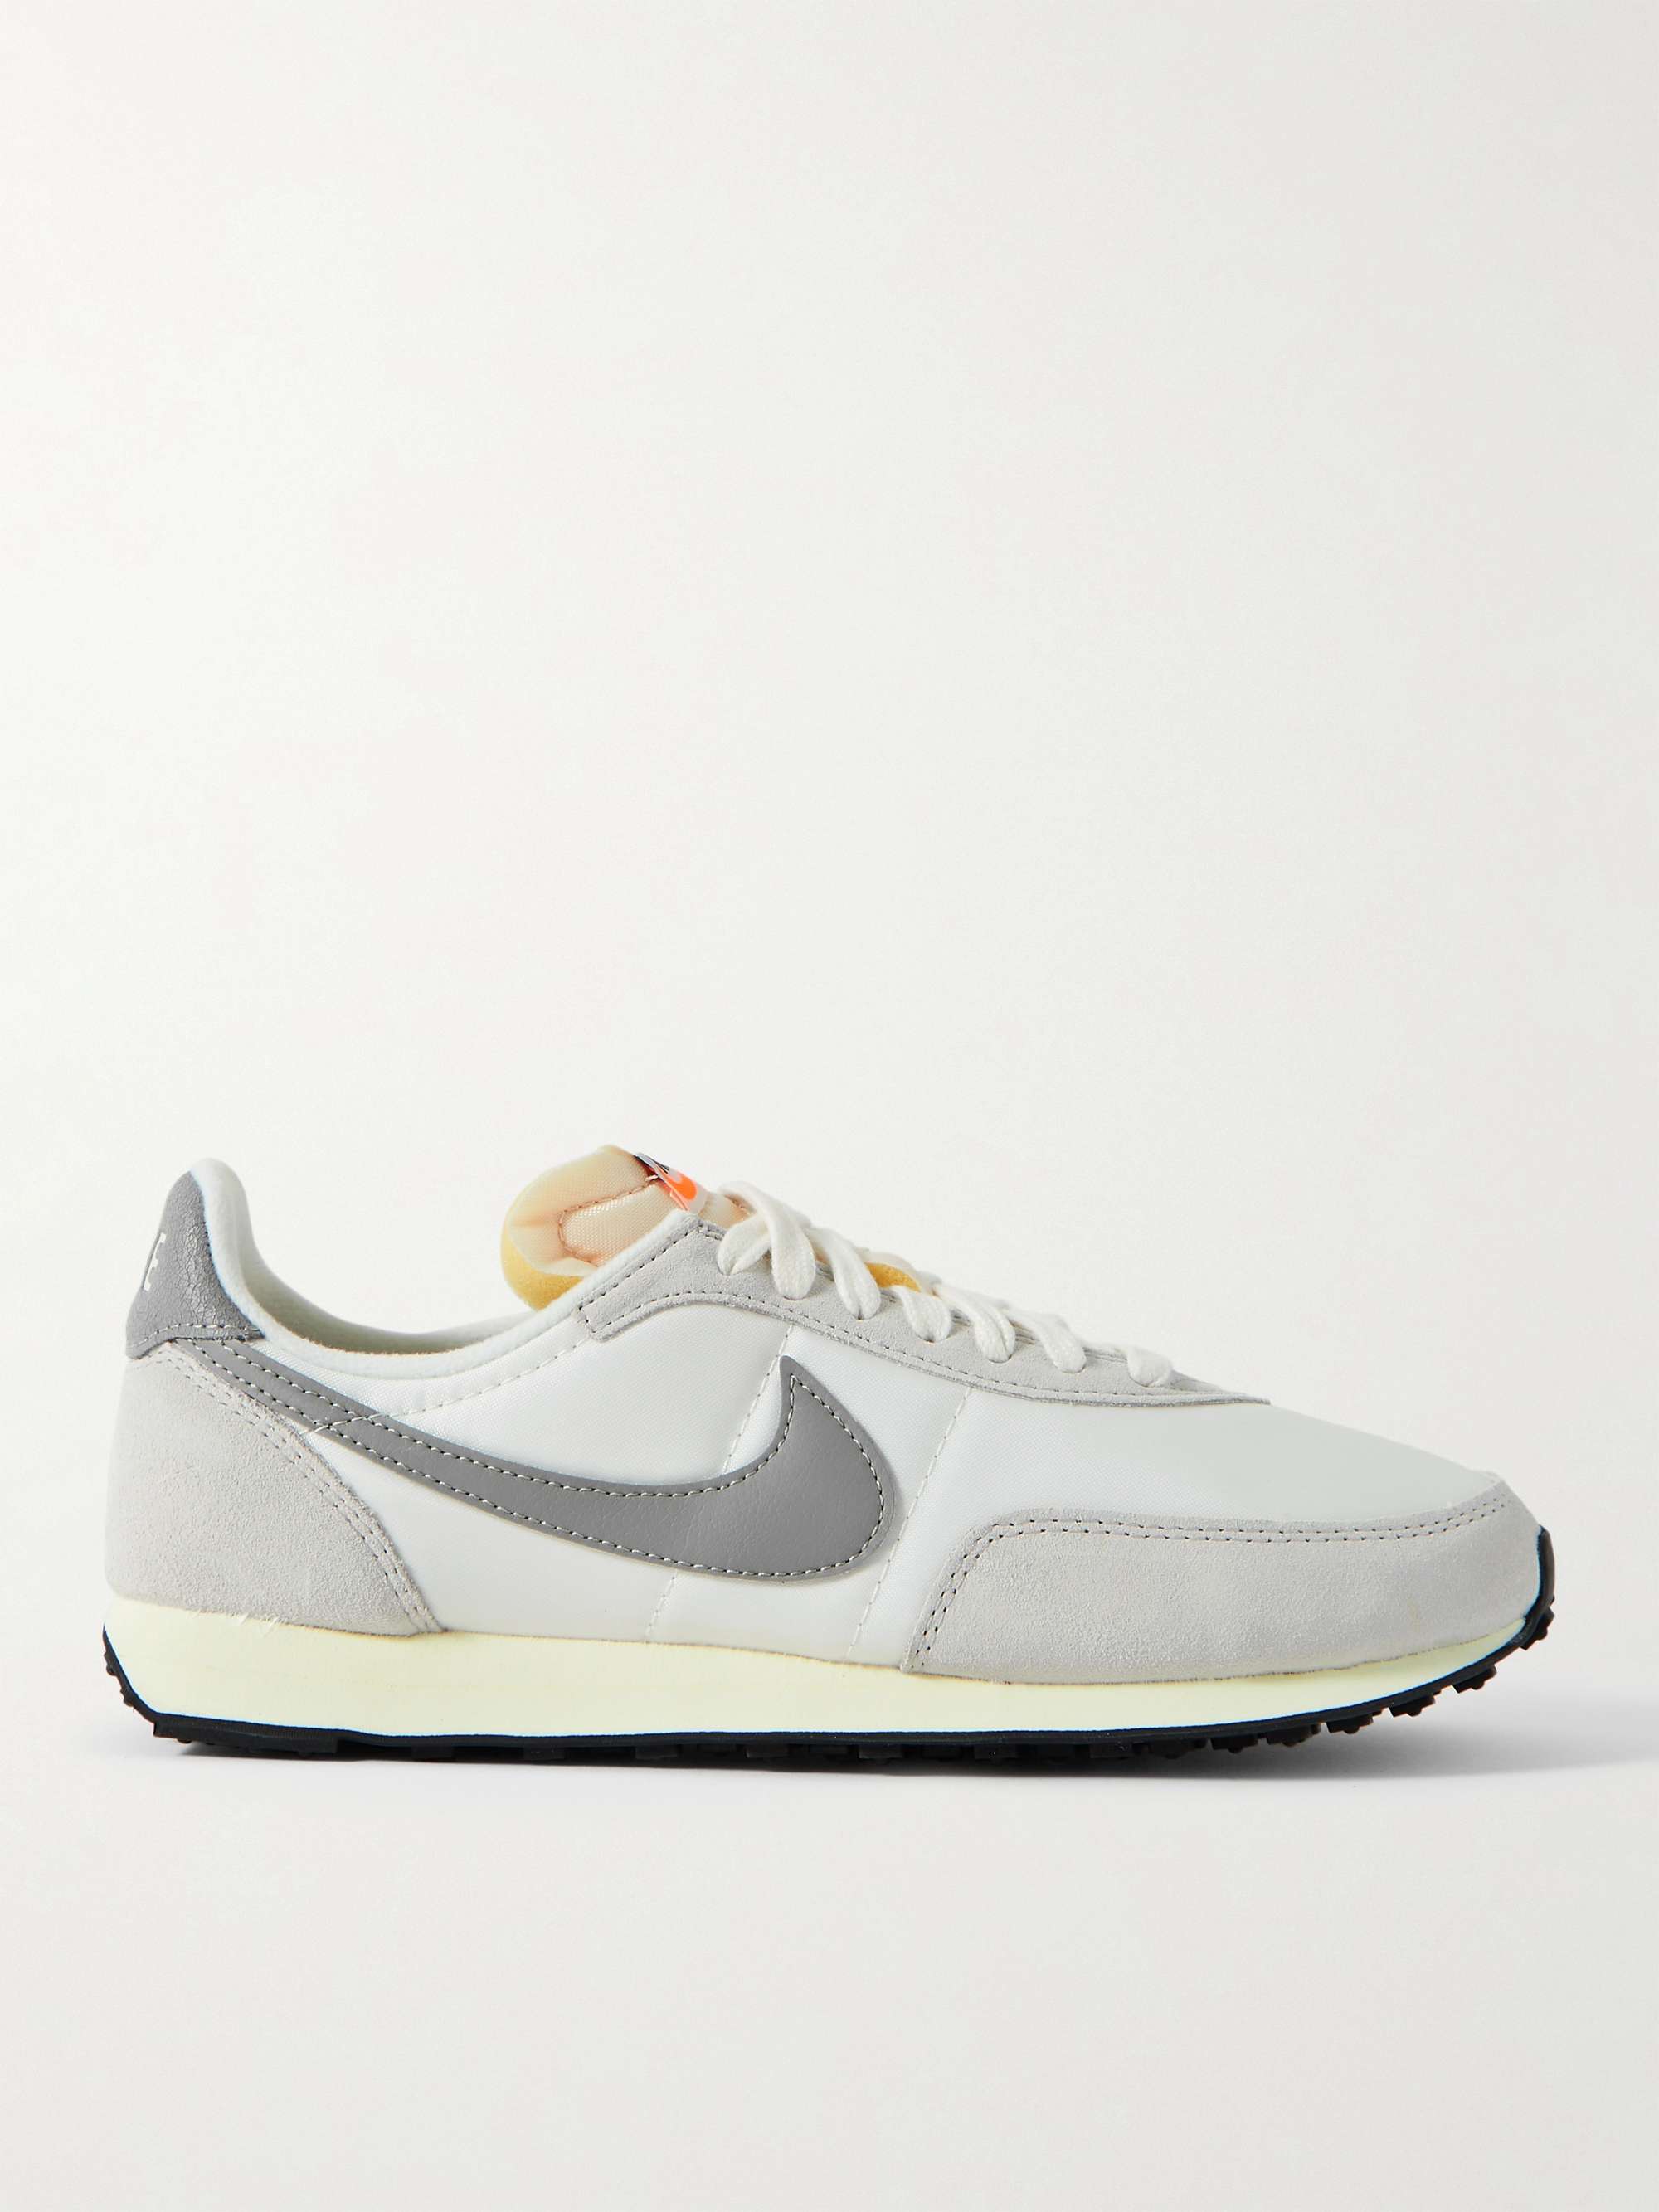 NIKE Waffle 2 SE Leather and Suede-Trimmed Nylon Sneakers | MR PORTER